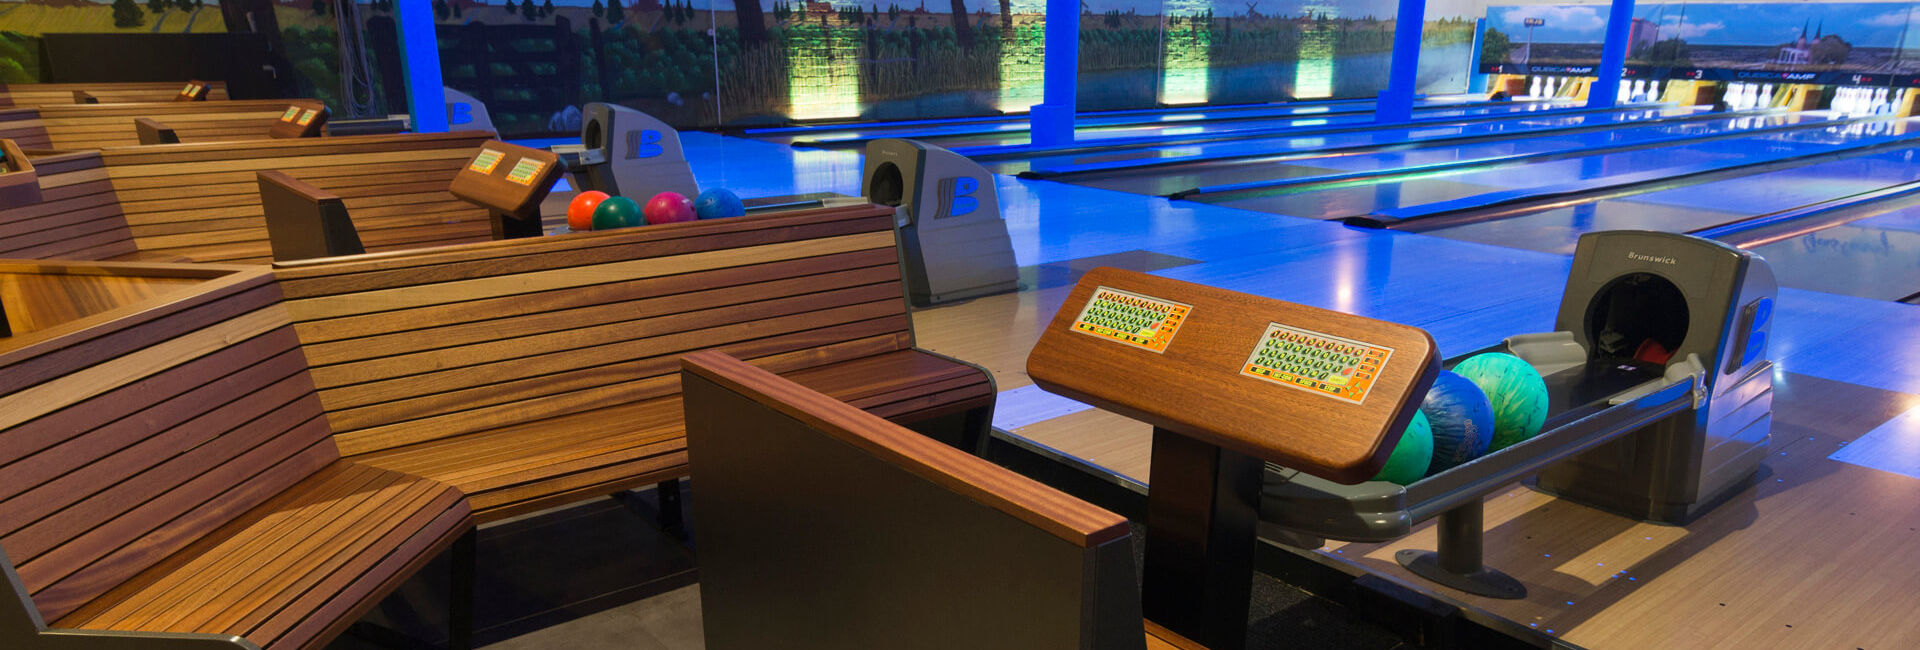 Bowling lanes and seats - Accessibility - Gasterij 't Karrewiel